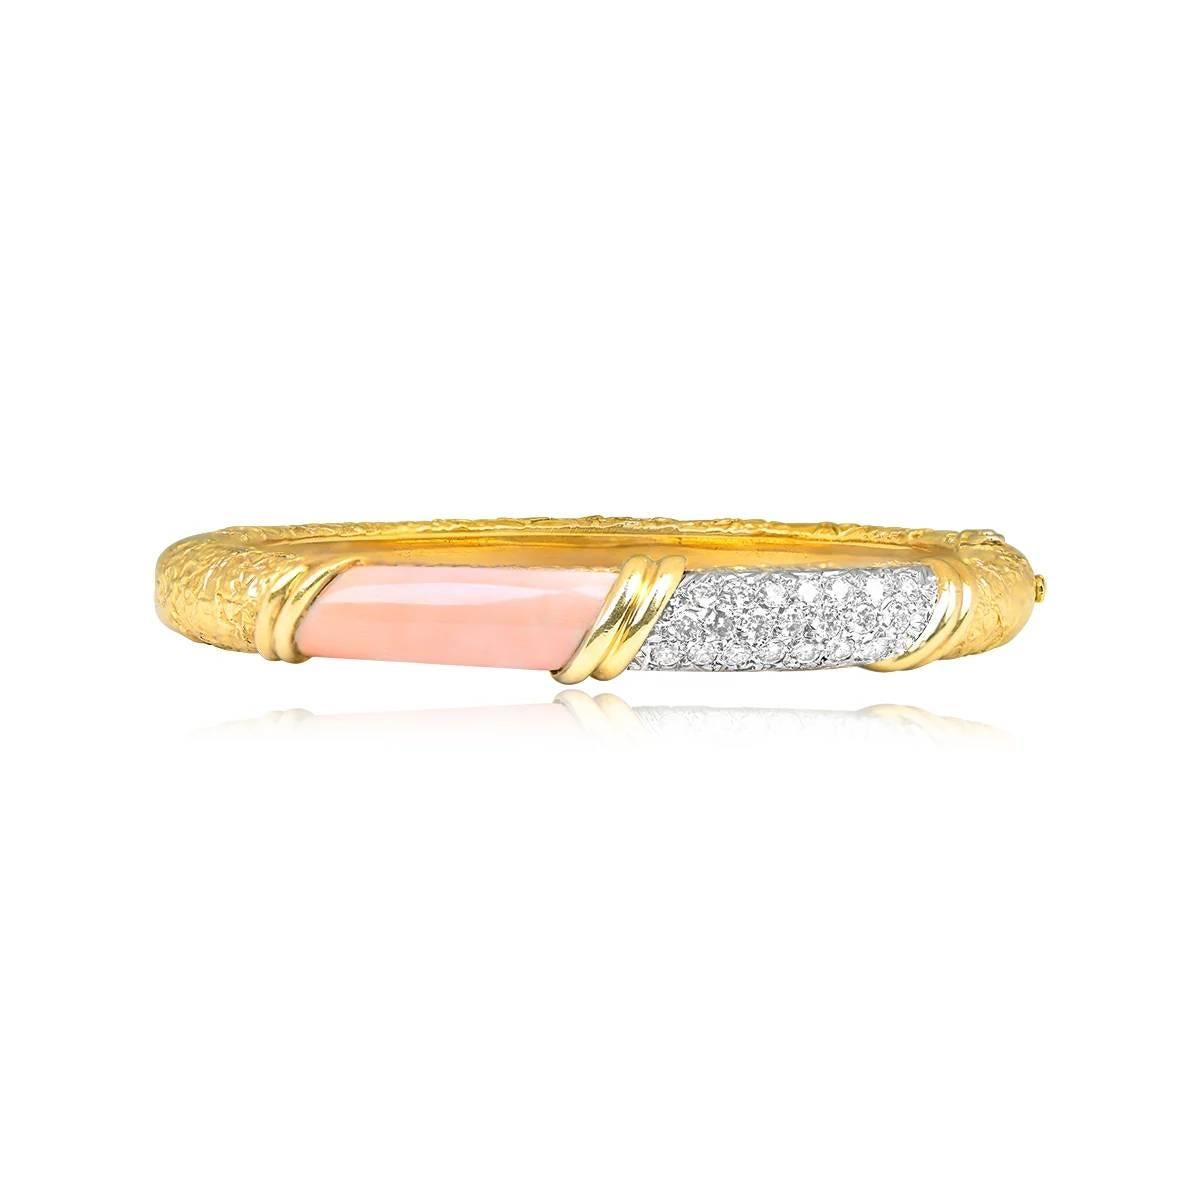 A stunning vintage Van Cleef & Arpels bangle, circa the 1970s, showcases a segment of angel skin coral and pave-set diamonds, with a textured gold design. This 18k yellow gold bangle, signed VCA and crafted in France, exudes timeless elegance.
The